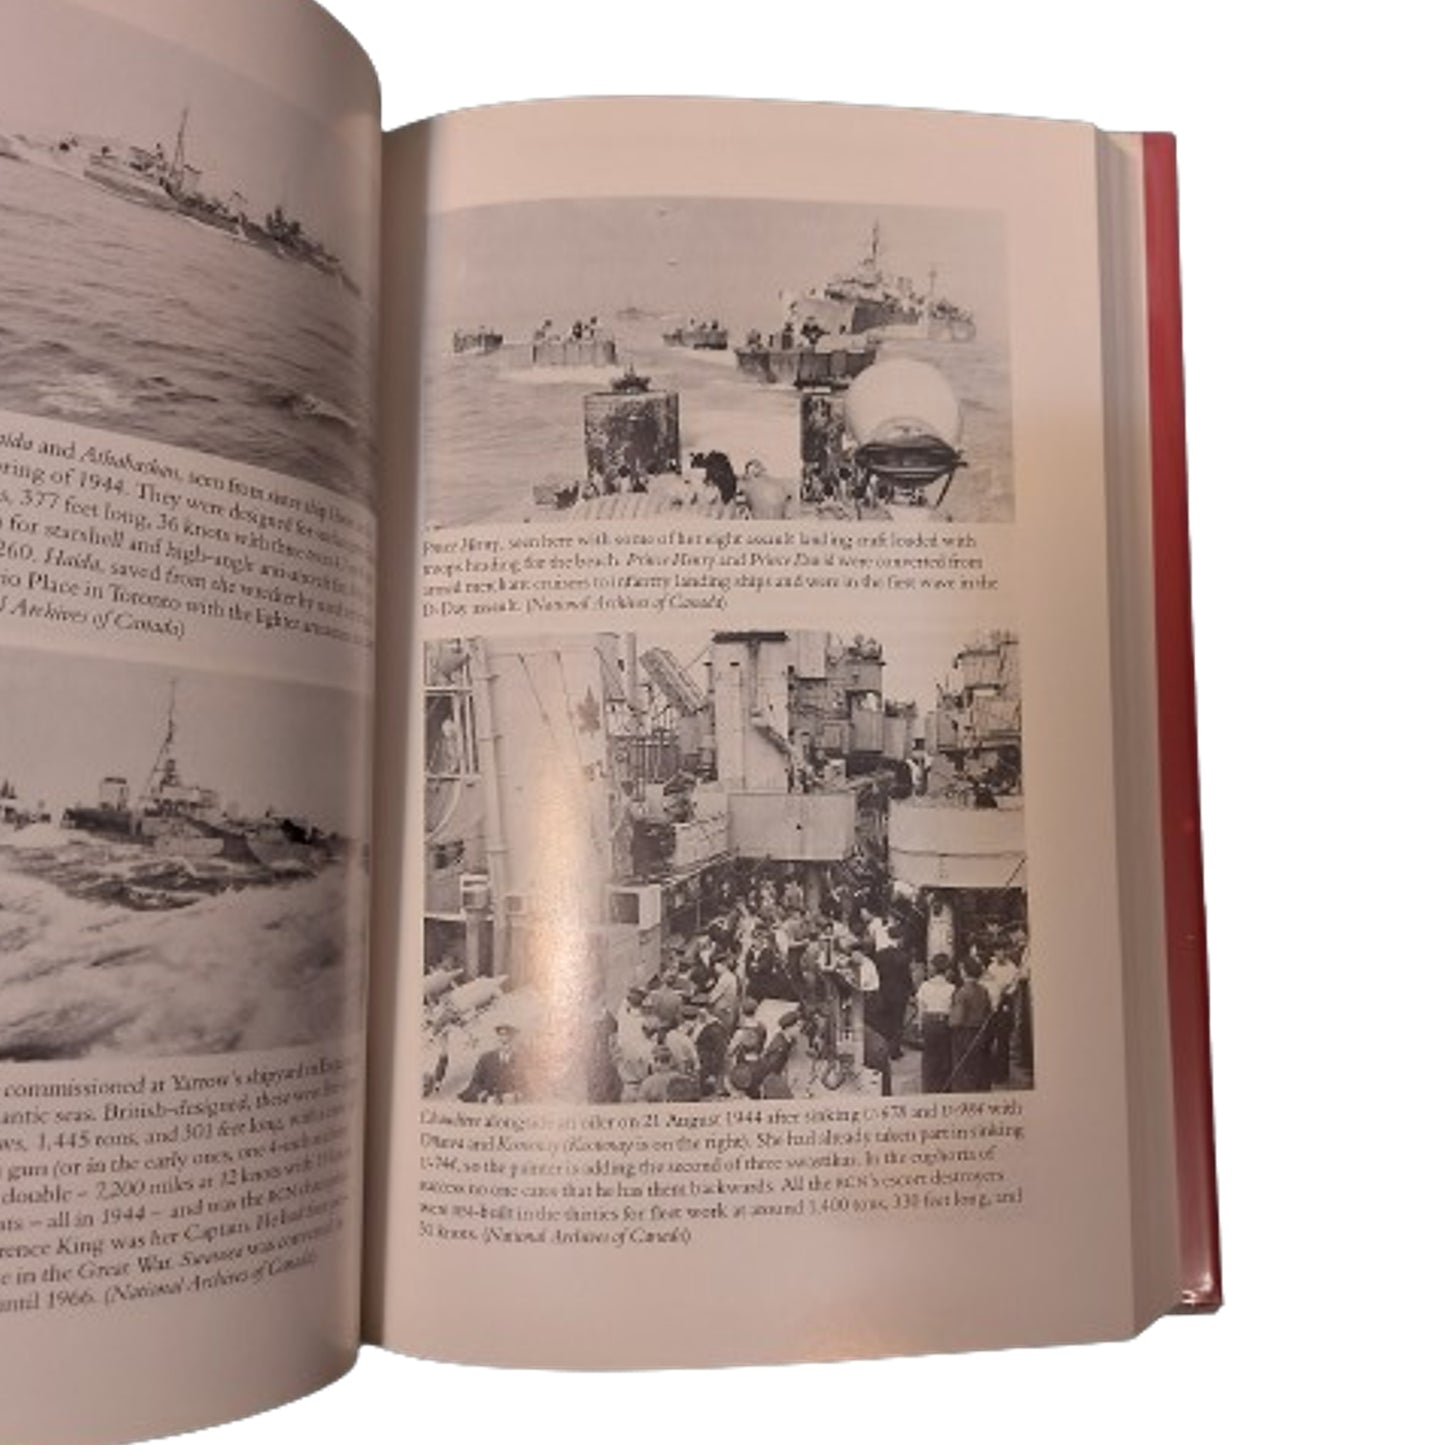 The Sea Is At Our Gates -The History Of The Canadian Navy